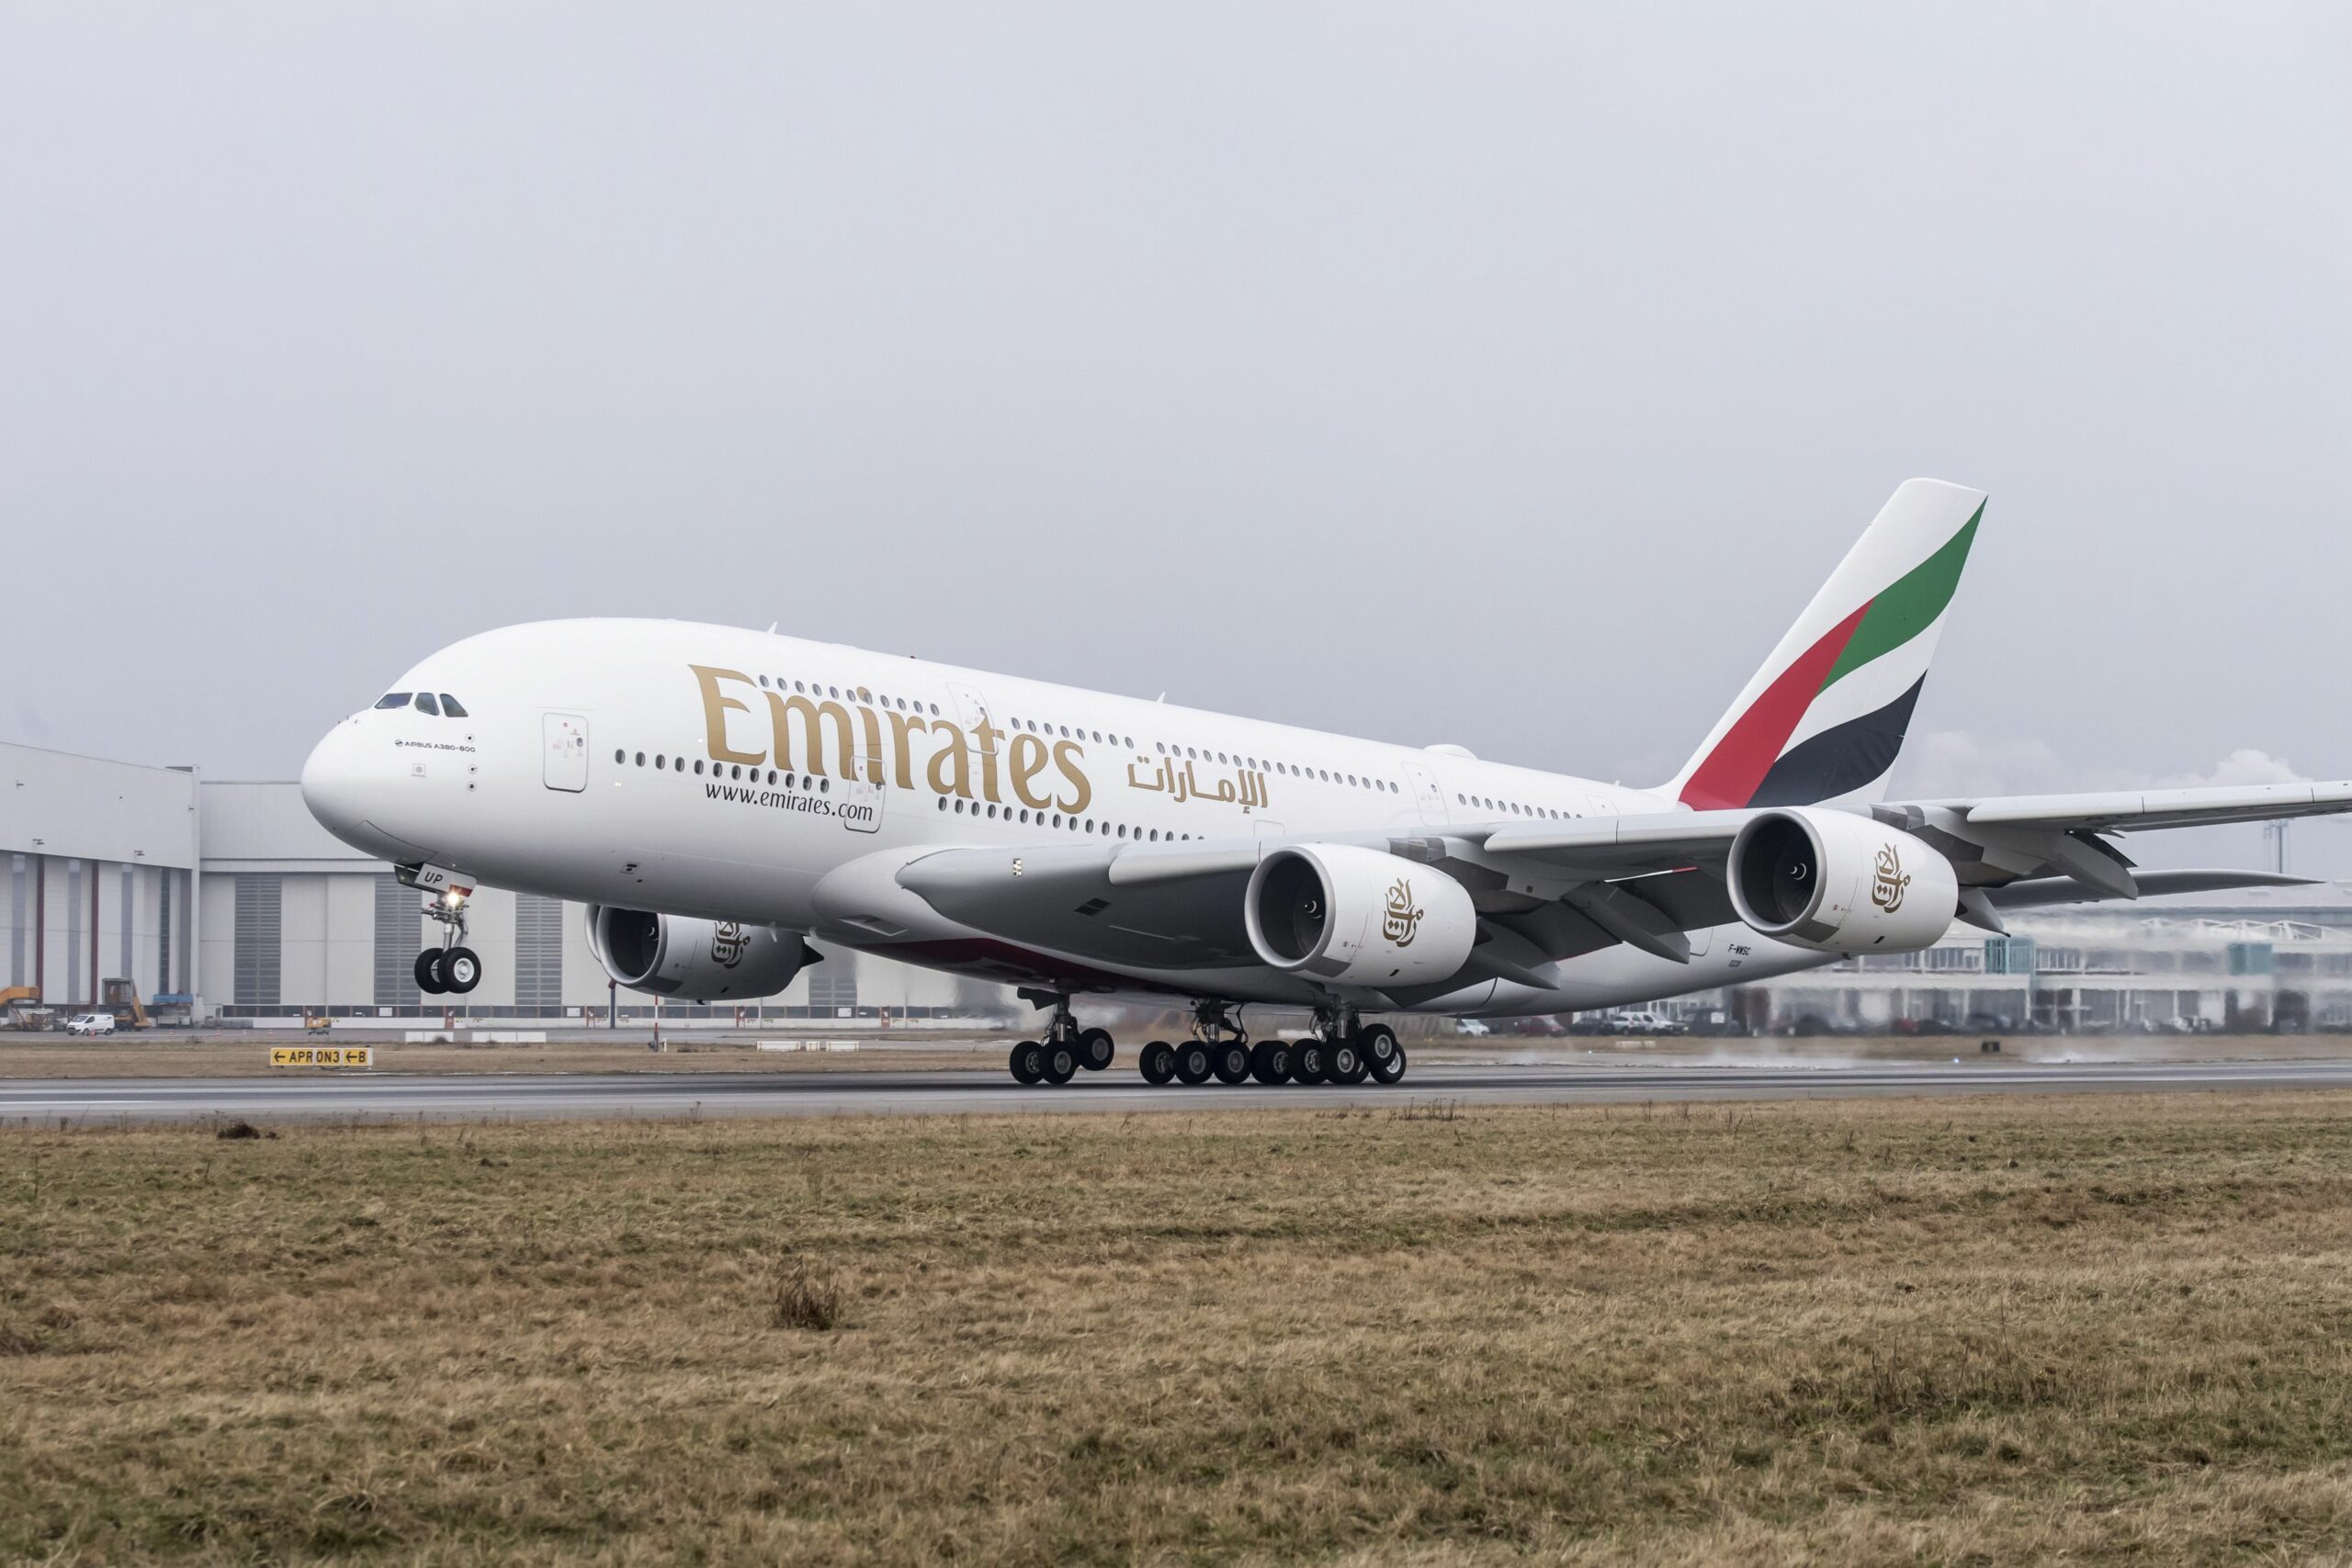 Goodbye to the A380, the biggest passenger plane there ever was